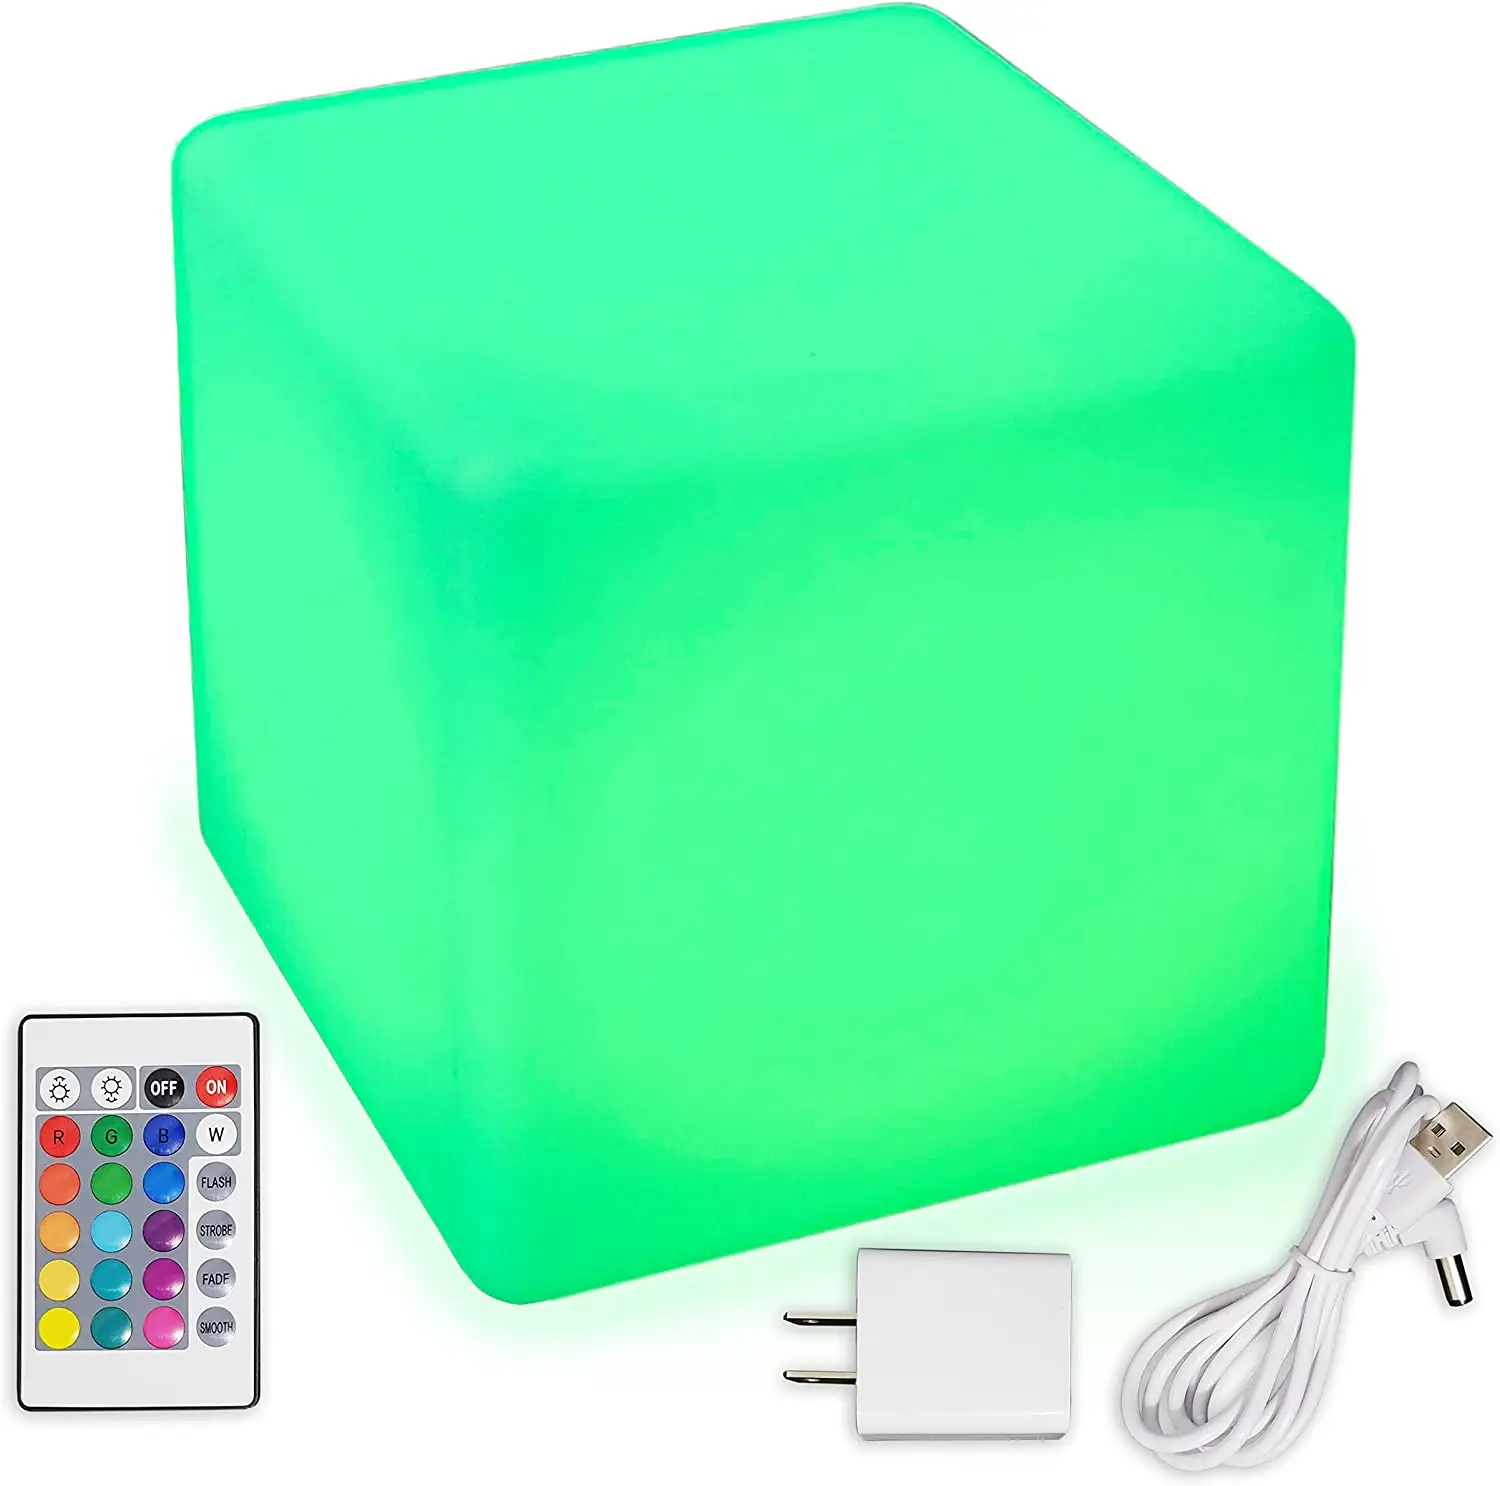 16 Inch Waterproof Square Seat Wireless Remote Control Flashing Led Cube Light For Outdoor Street Floor Chair